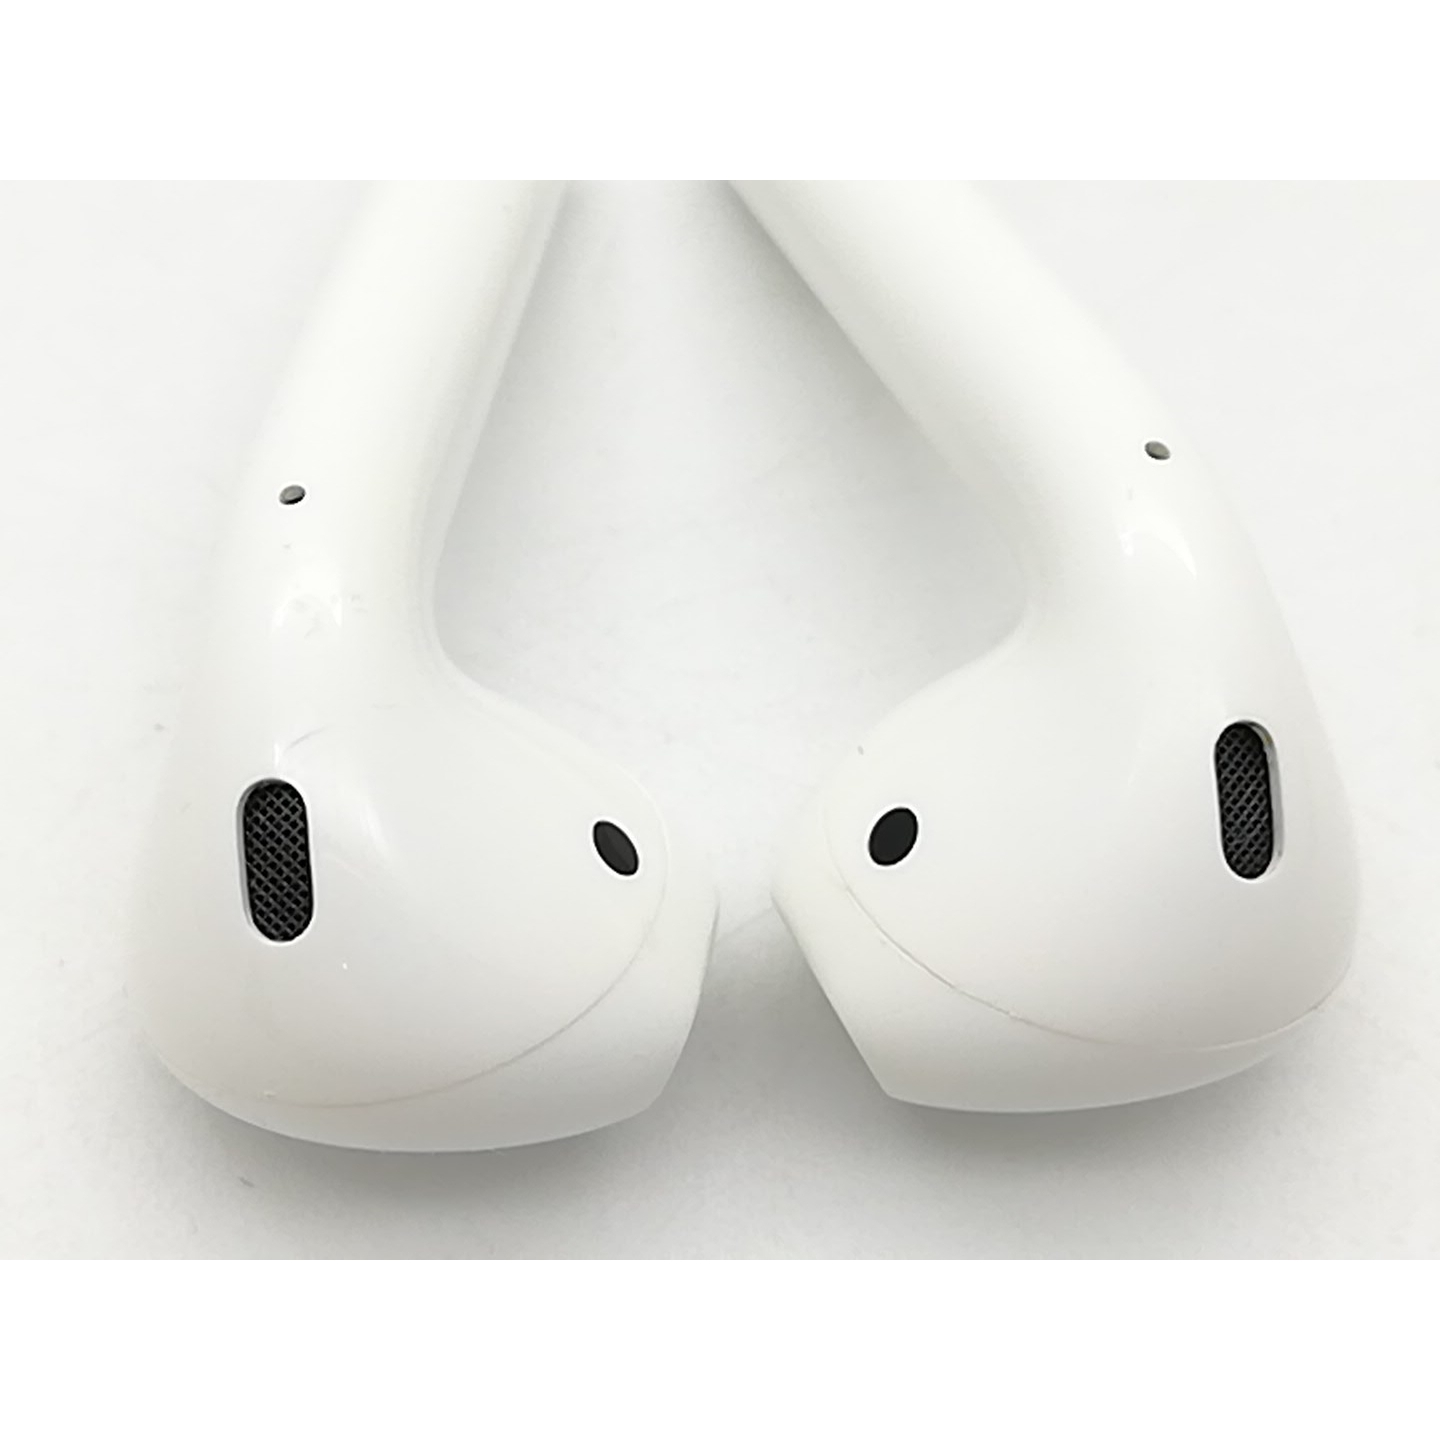 Apple AirPods（第2世代） ワイヤレス充電ケース MRXJ2J A保証期間１